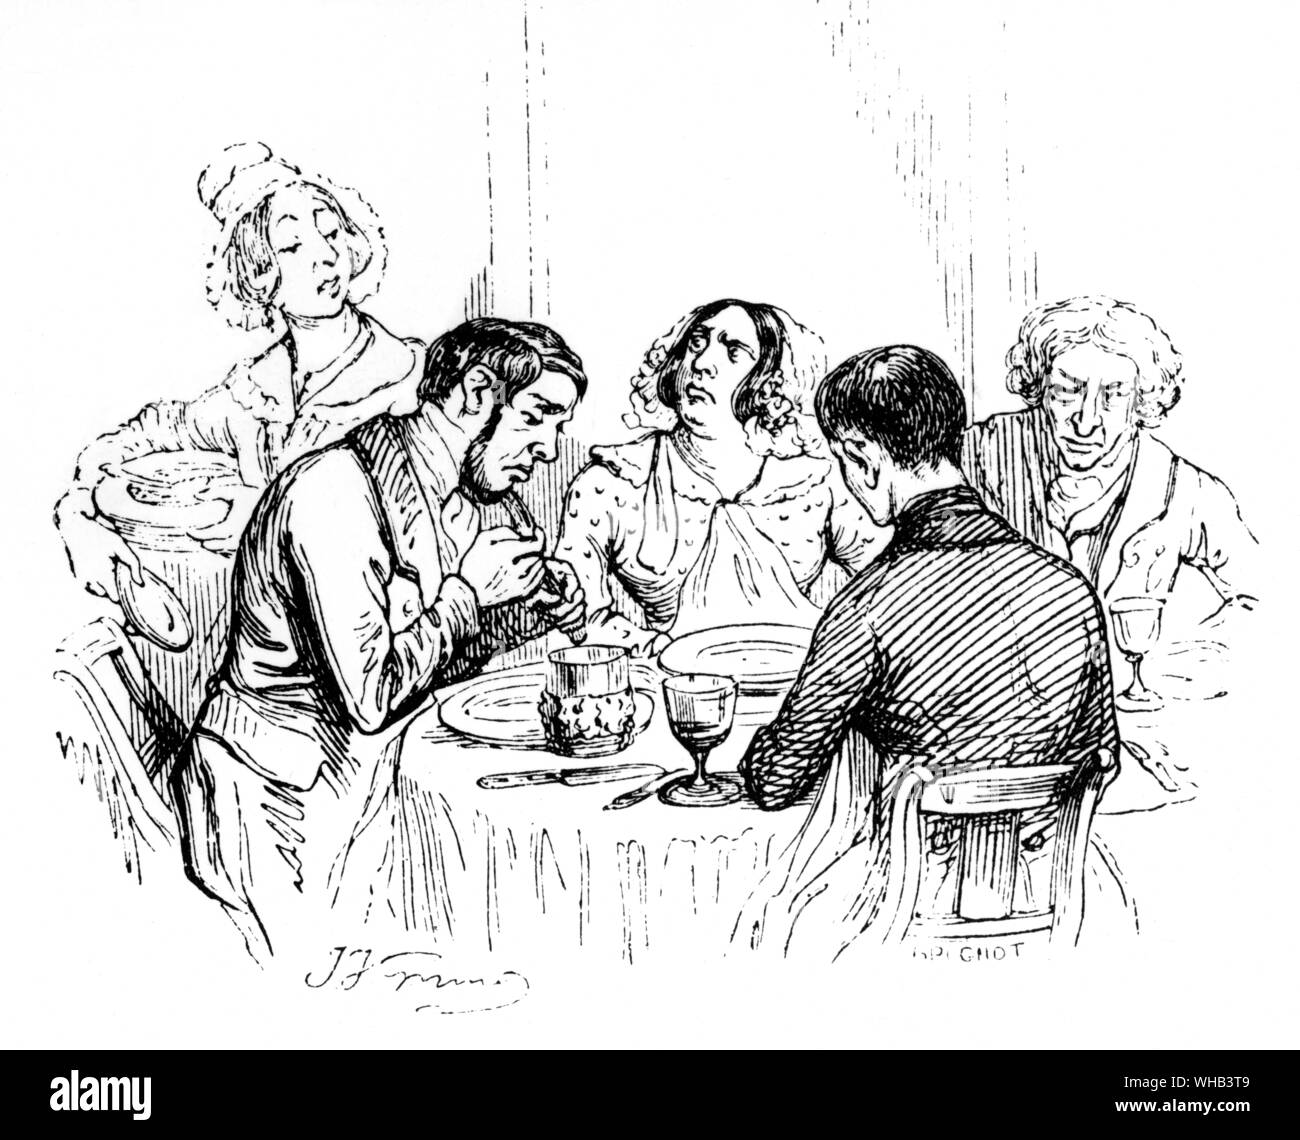 Unhappy costumers around the dining table in a French restaurant. Stock Photo